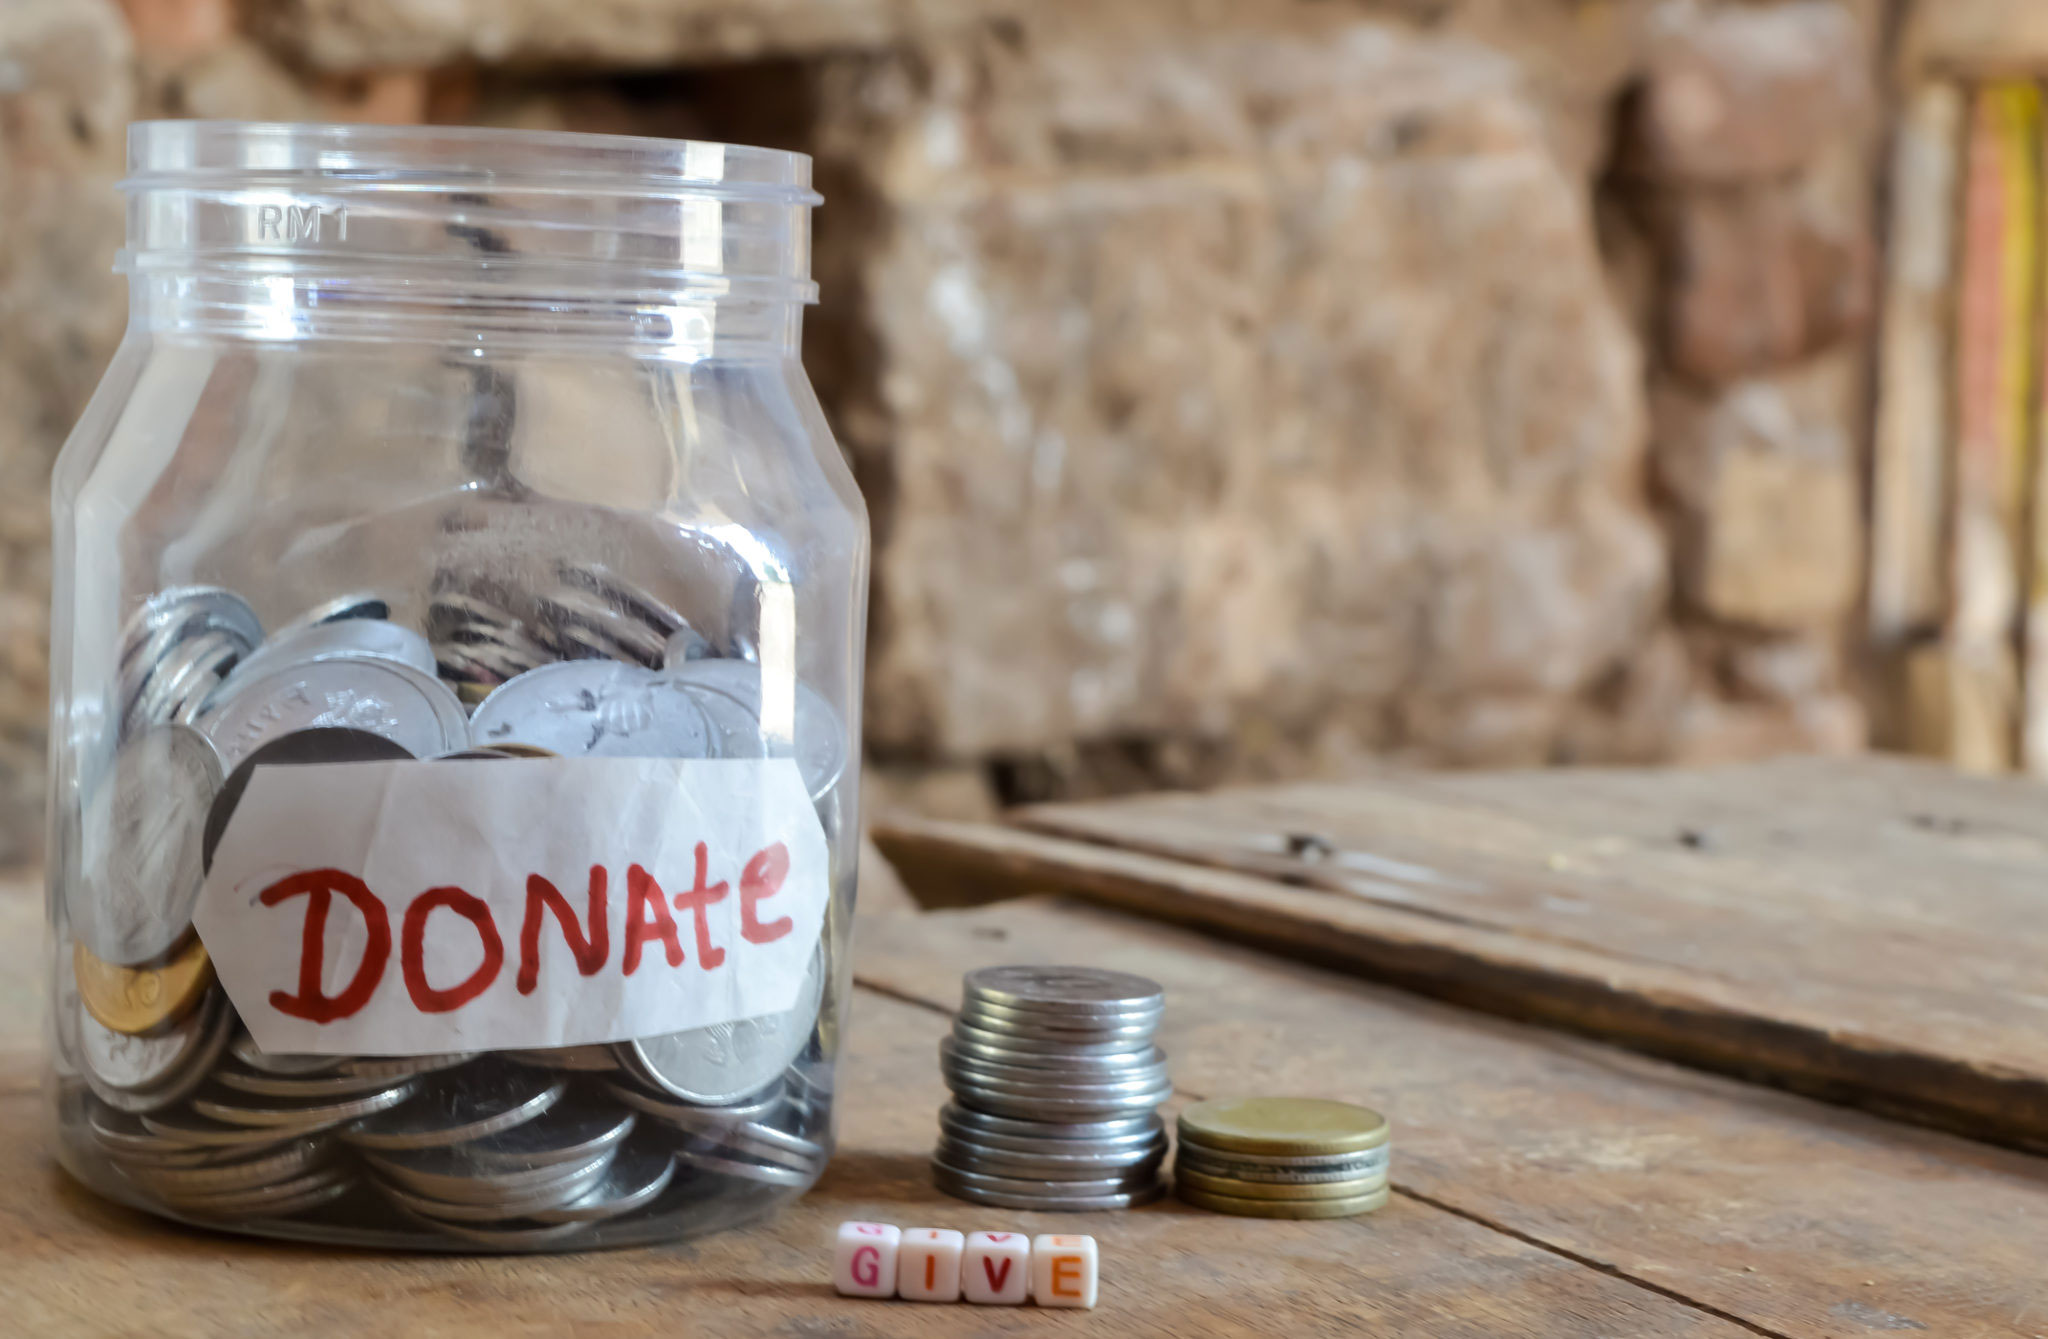 Give-donate-,money-jar-with-a-label-with-the-word-donations-on-it